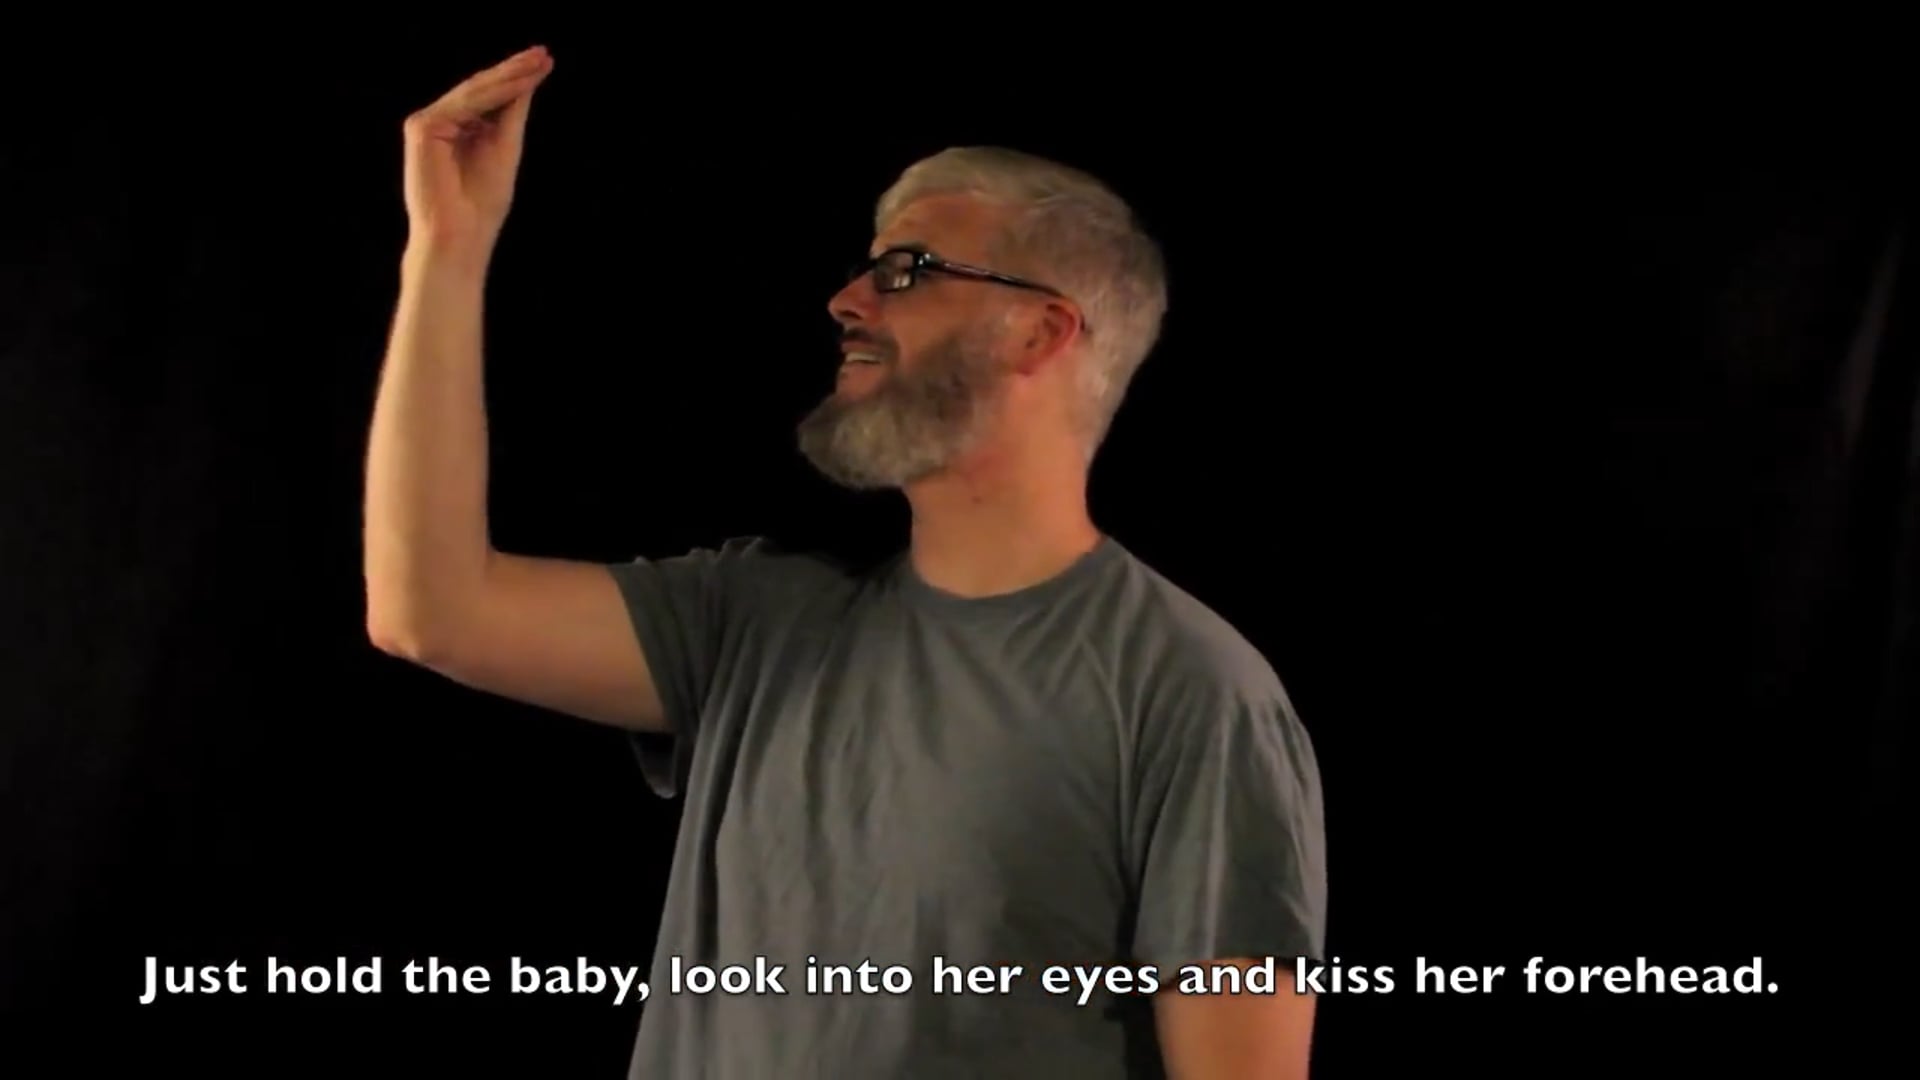 Kissing my child's forehead (ASL Poem)